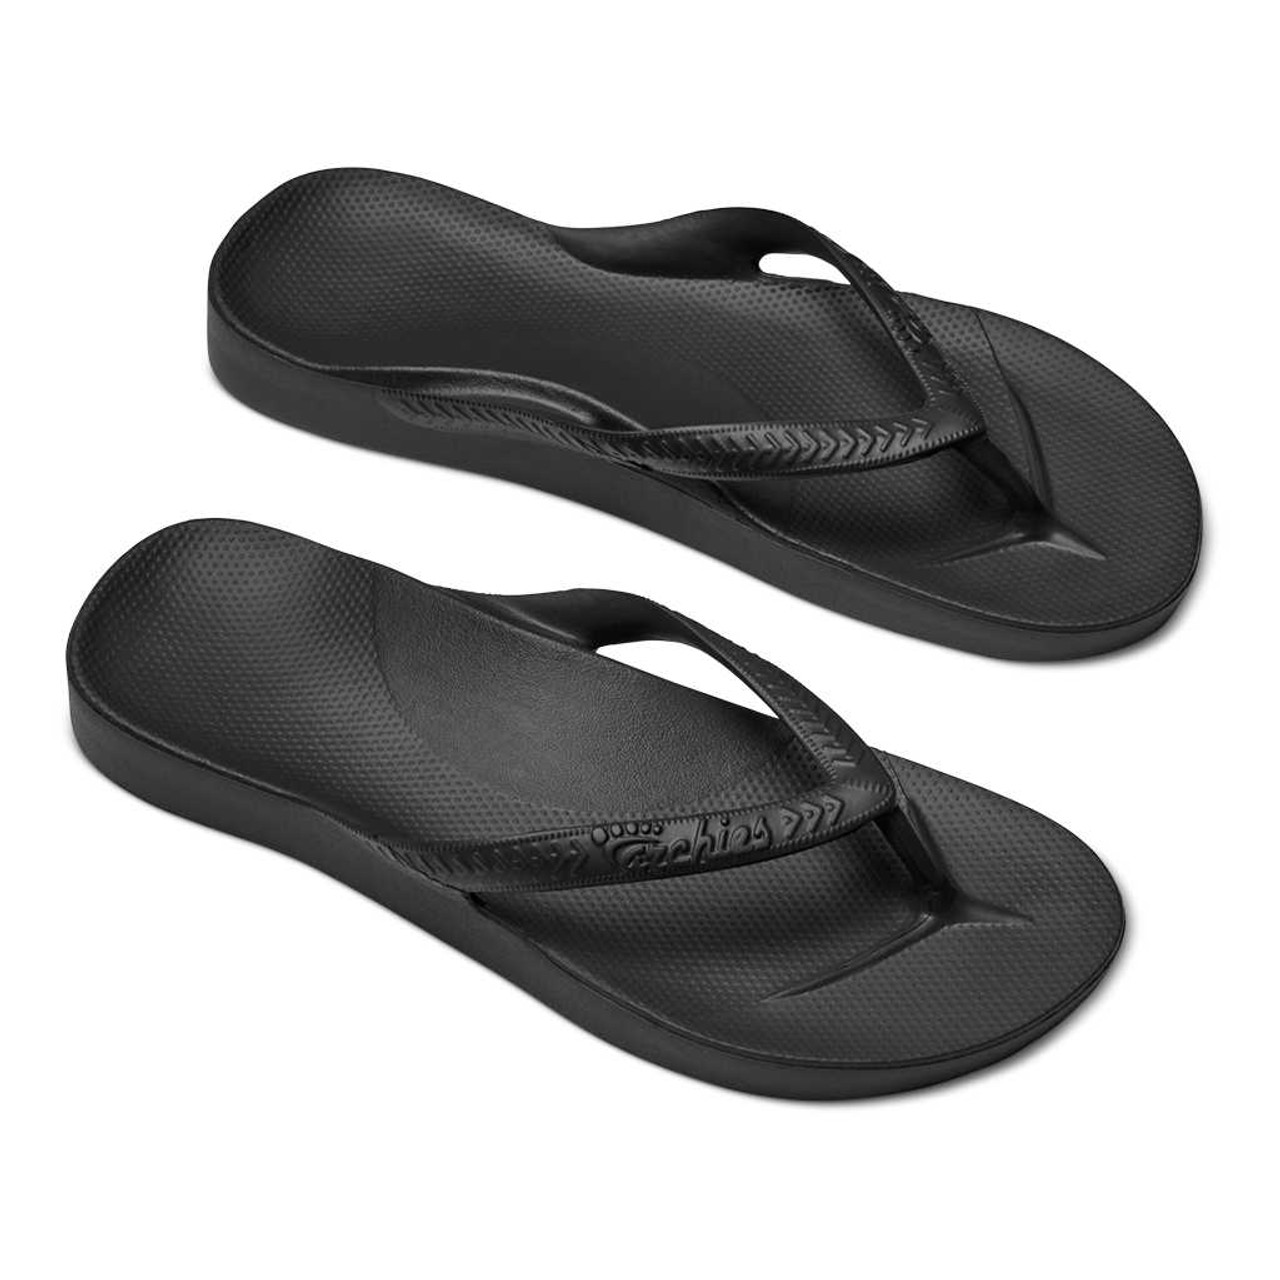 Archies Arch Support Flip Flops, Limited time offer!, freight transport